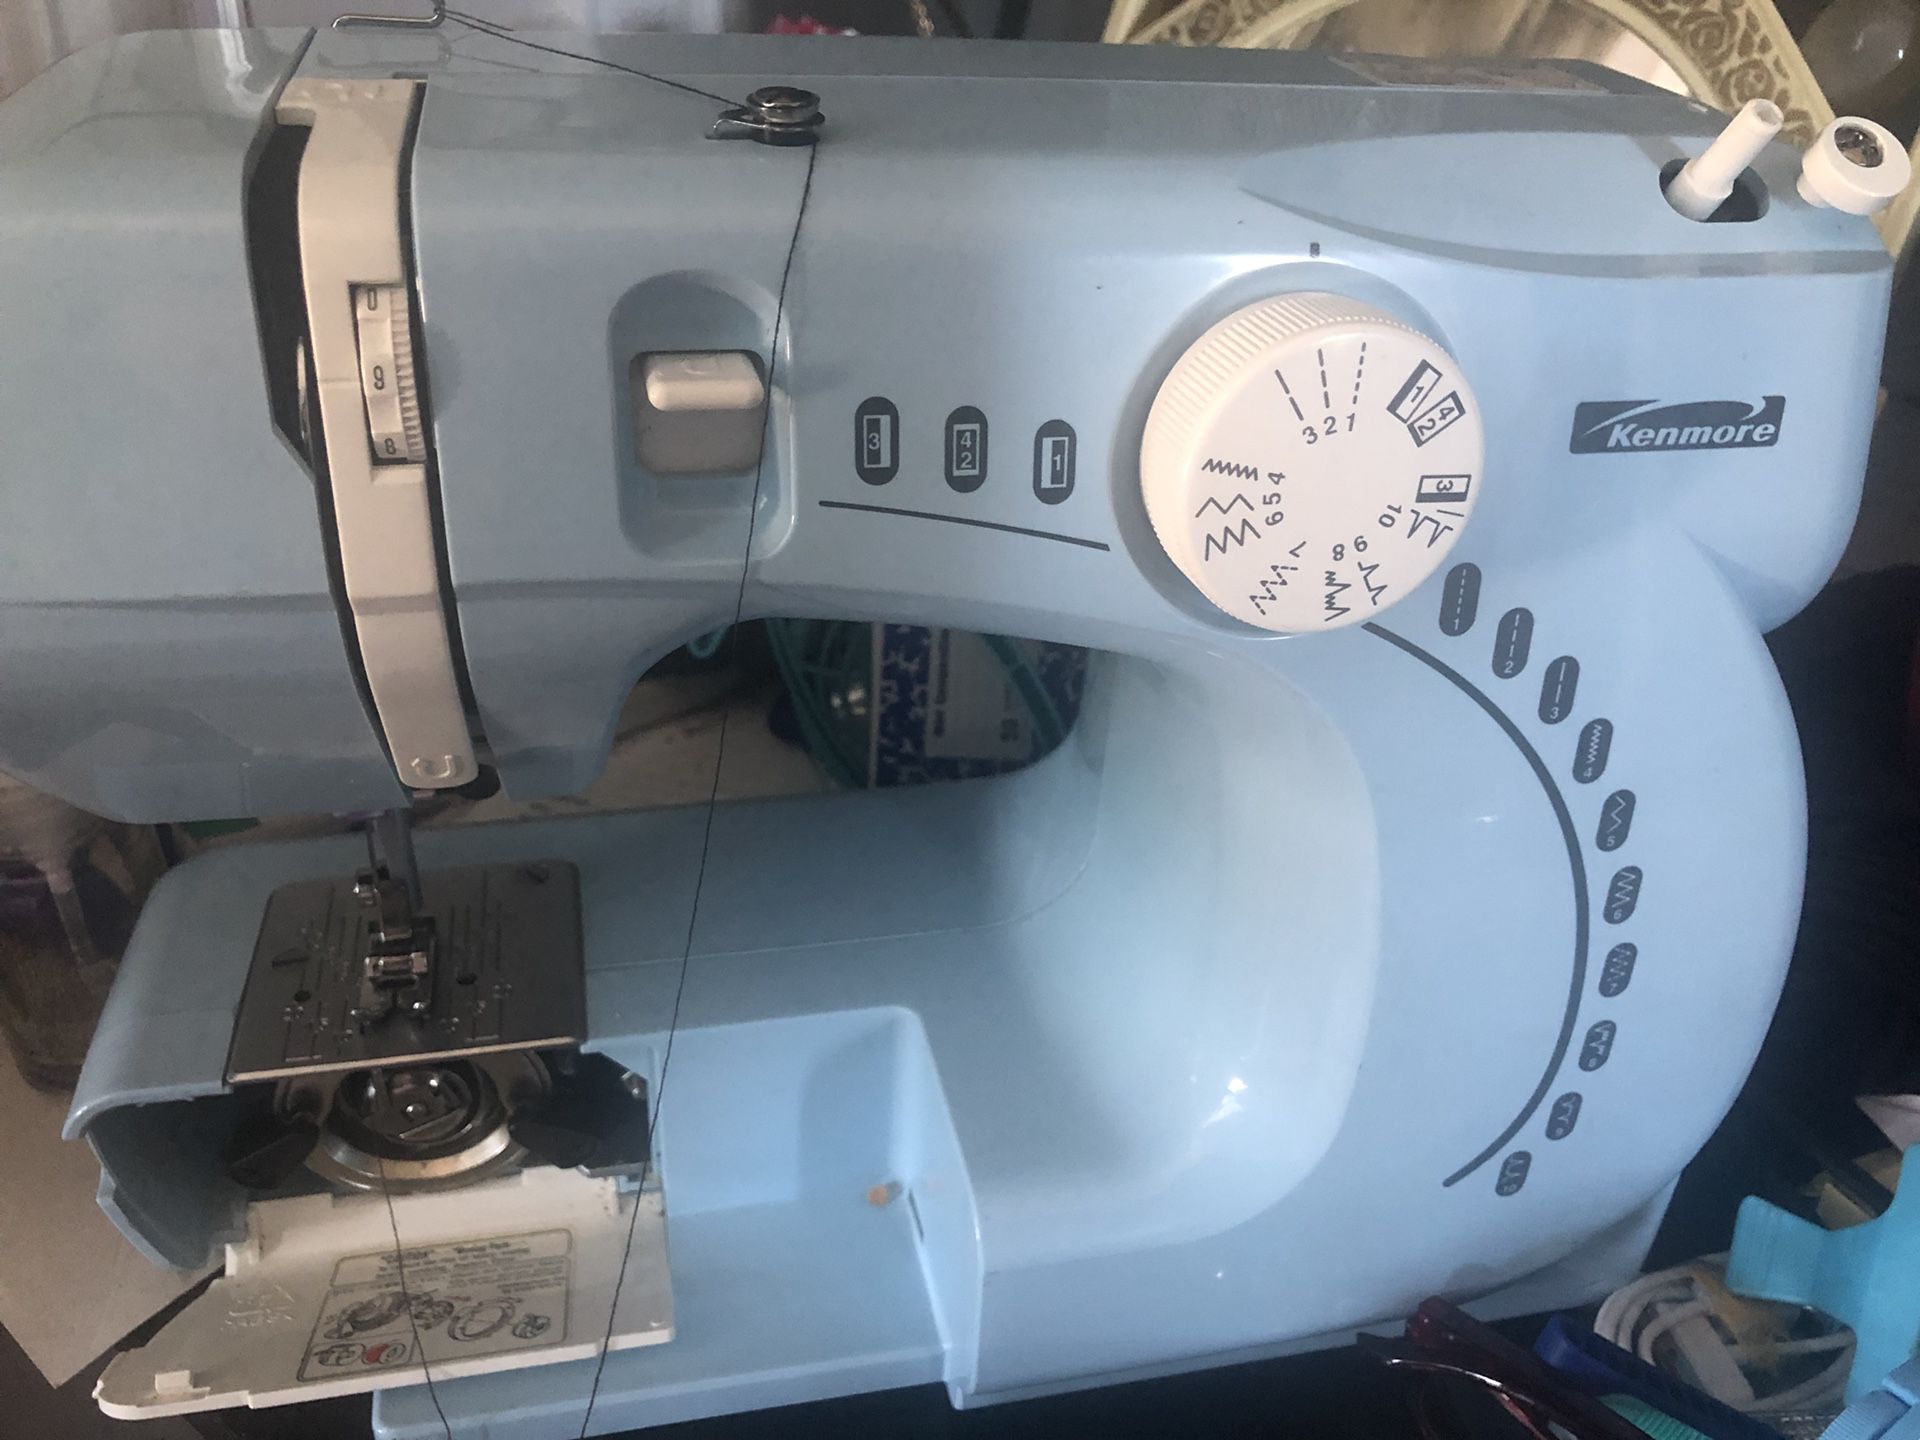 Sewing machine Kenmore. Not picking up the bottom thread other than that works.